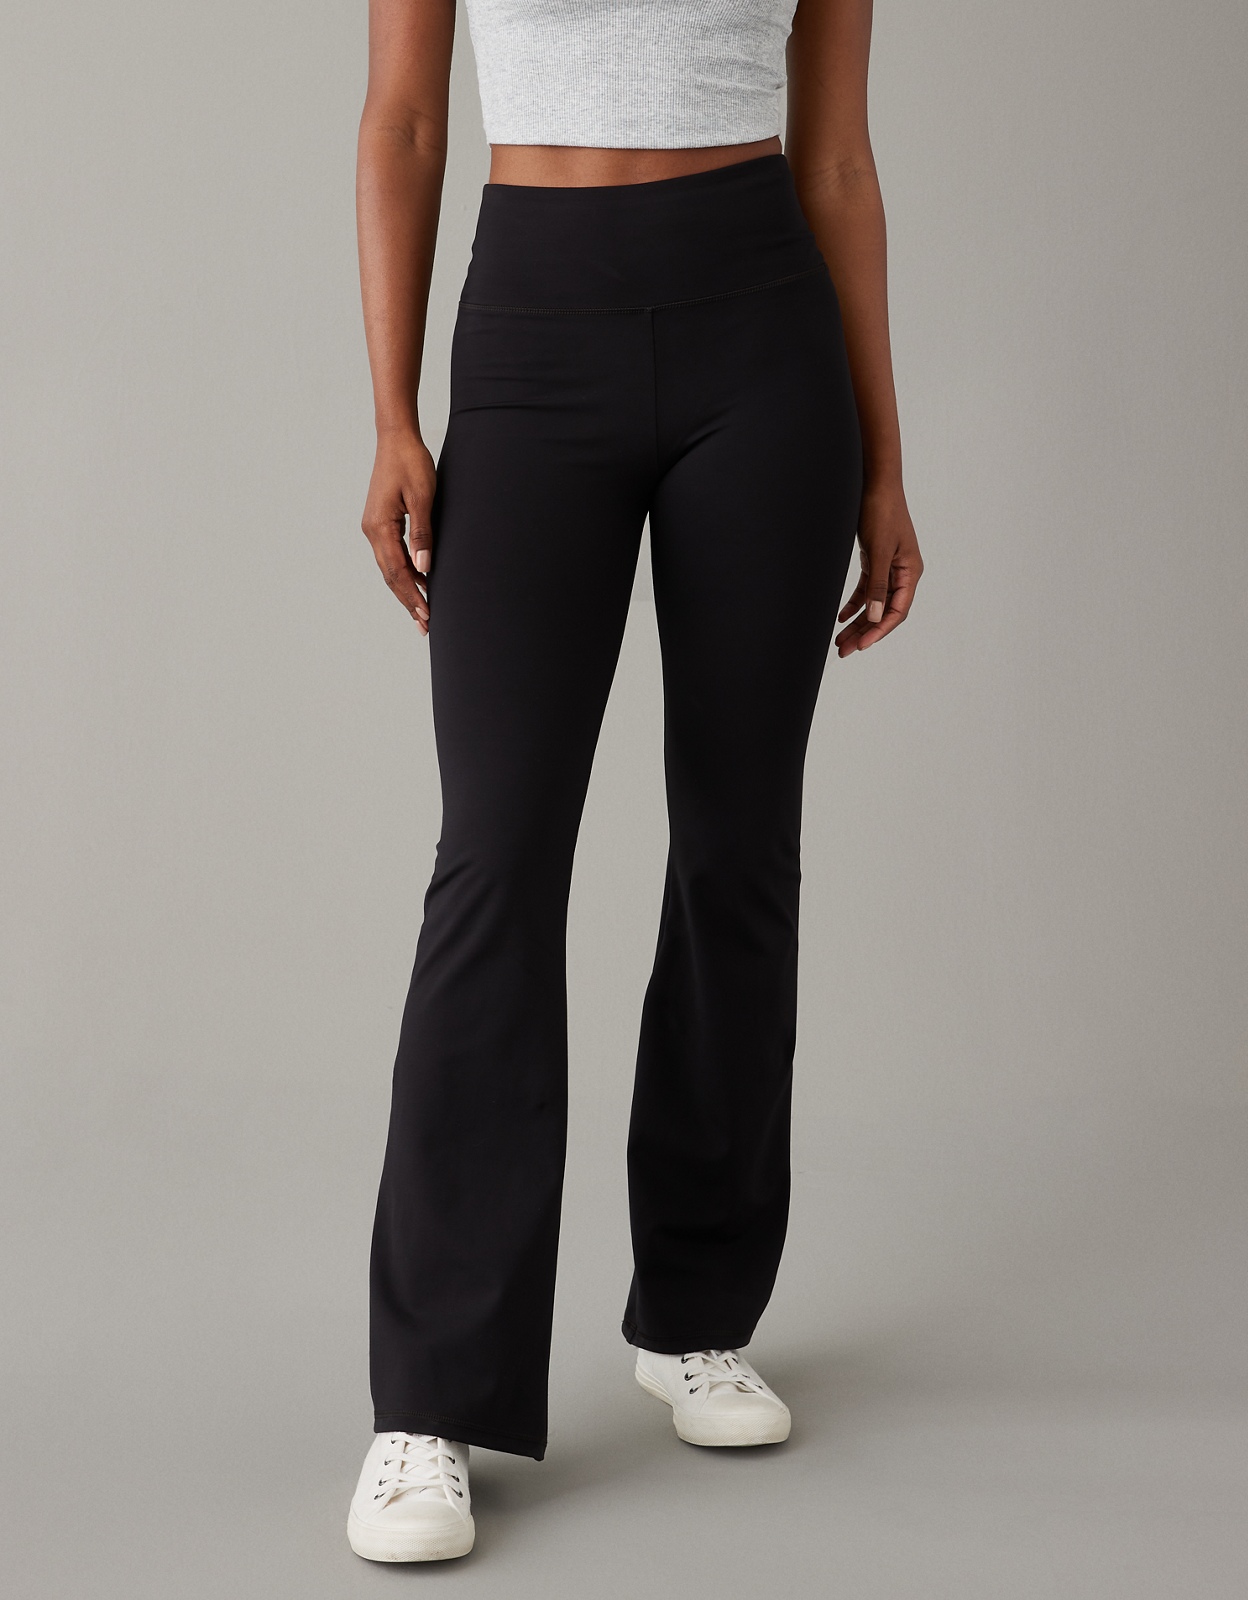 Buy AE The Everything High-Waisted Flare Legging online